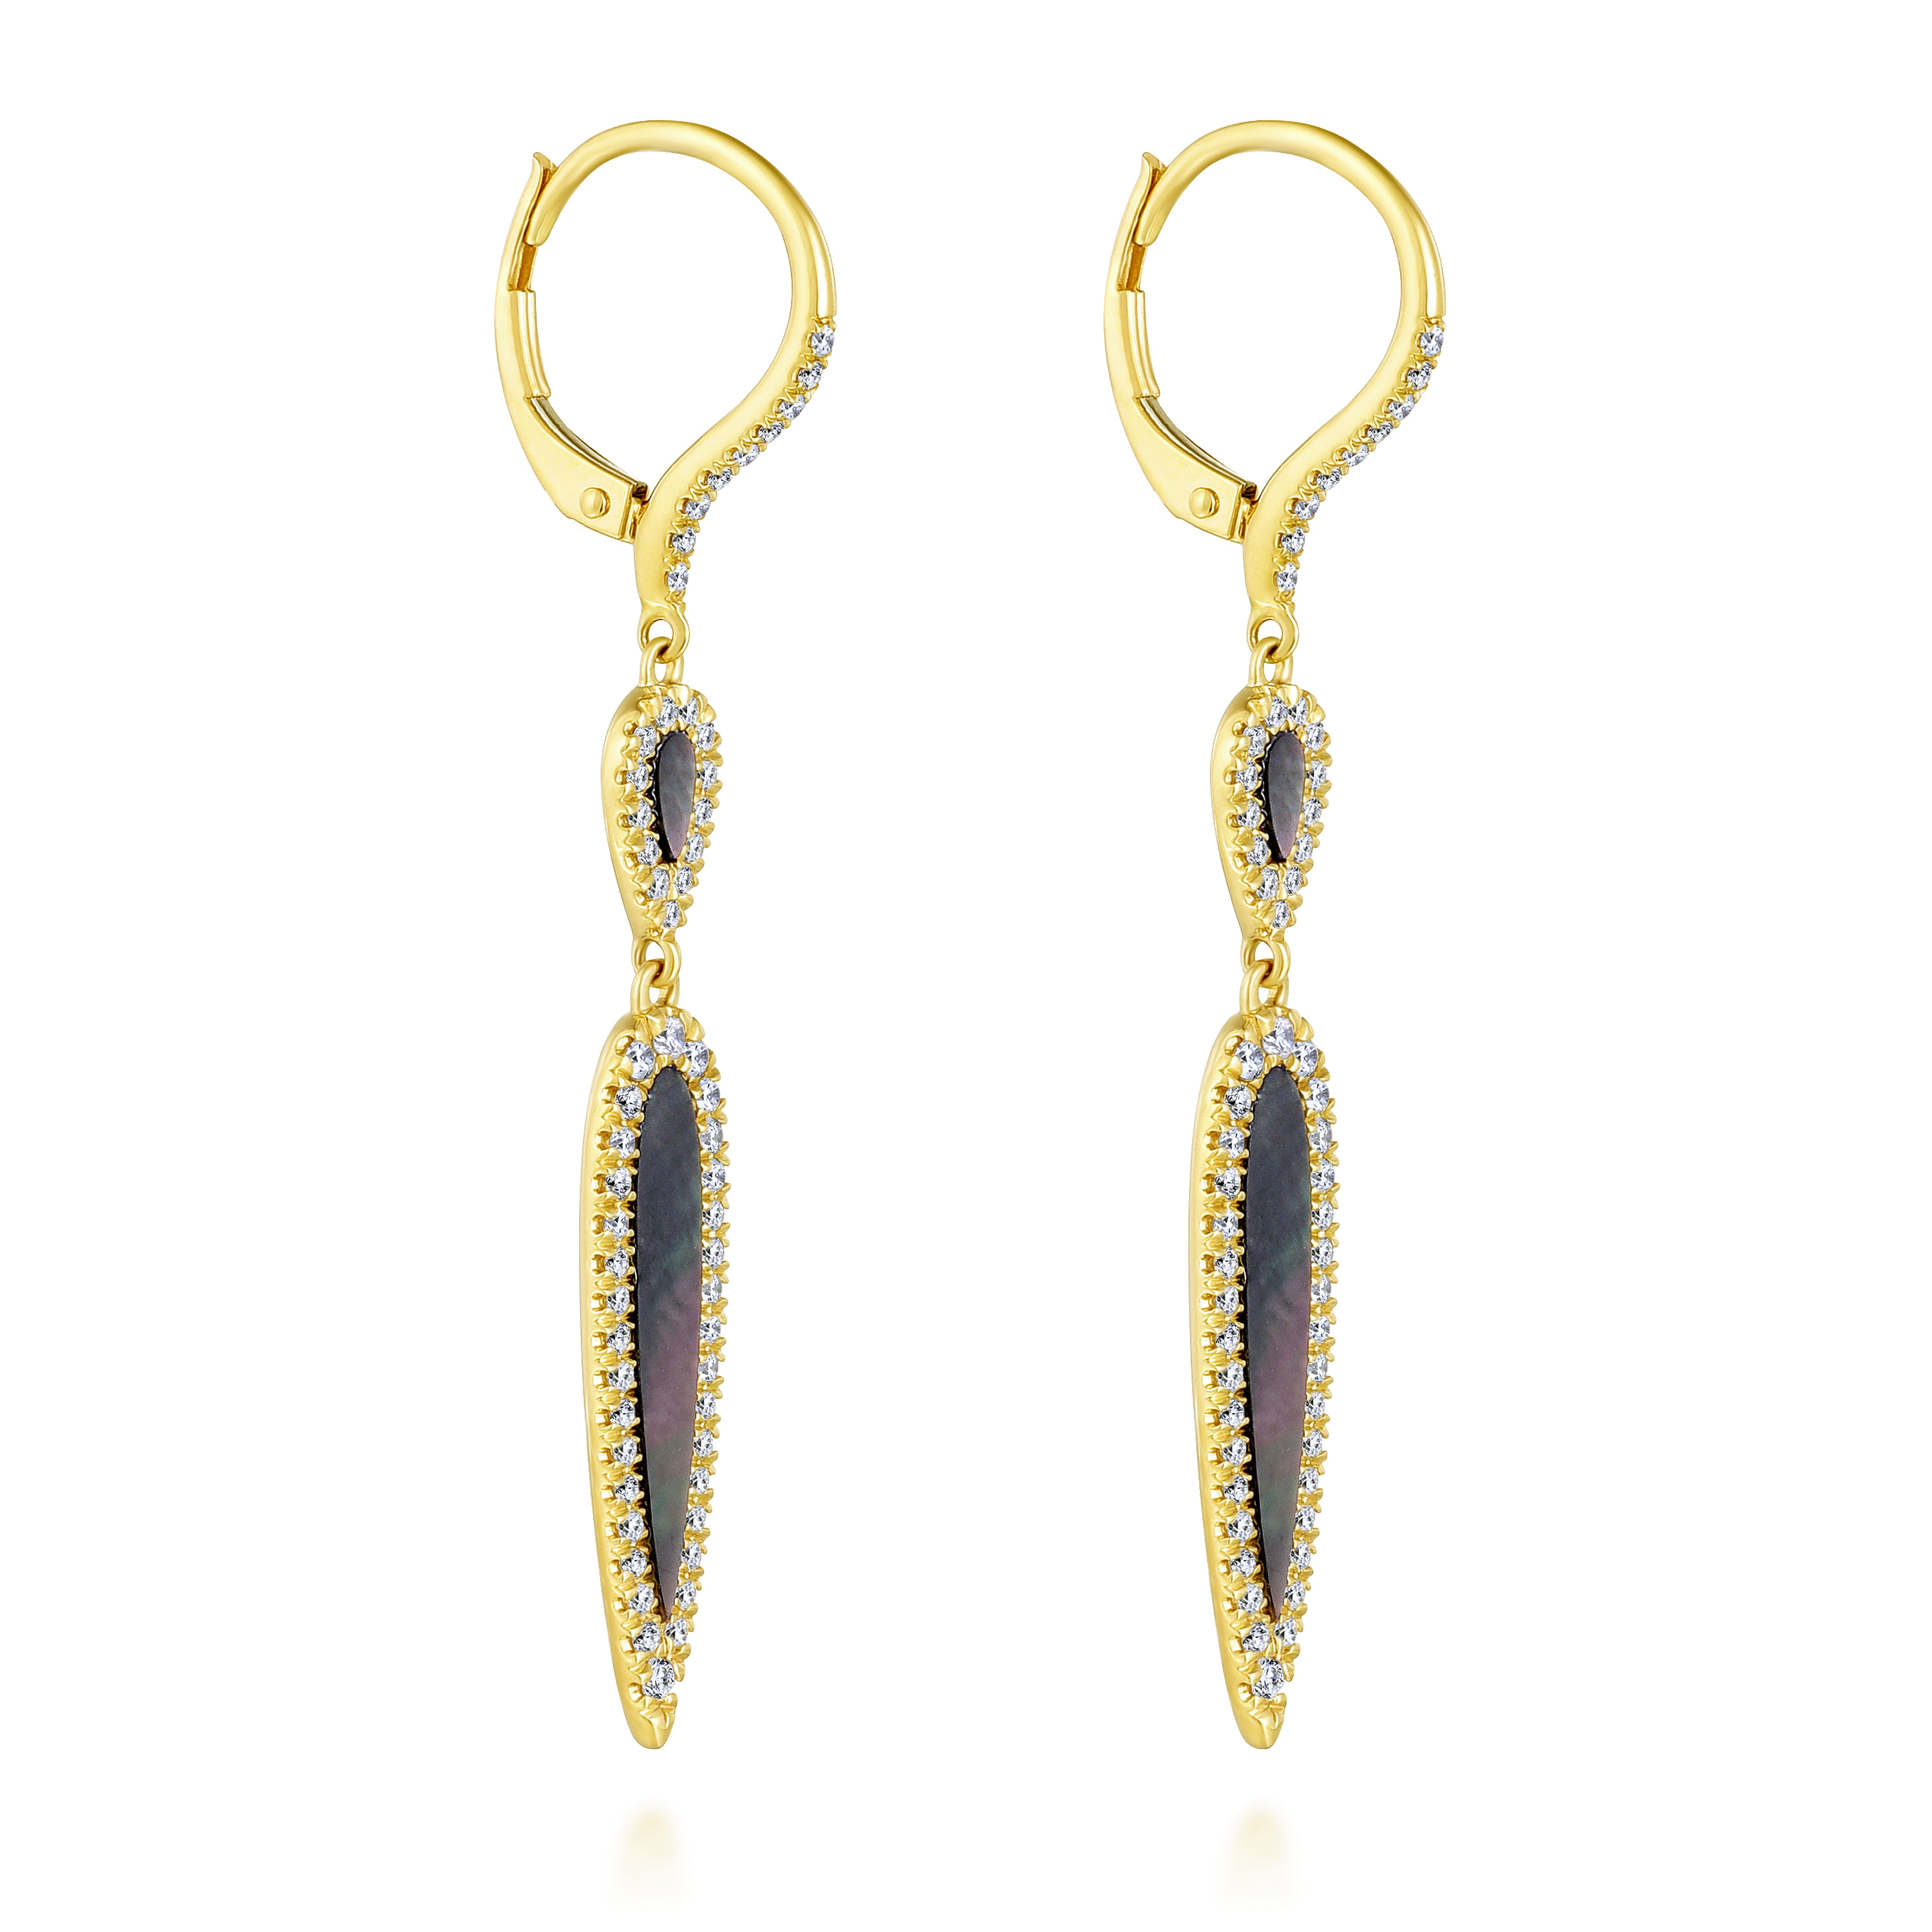 14K Yellow Gold Linear Double Teardrop Earrings with Diamonds and Black Mother of Pearl Inlay